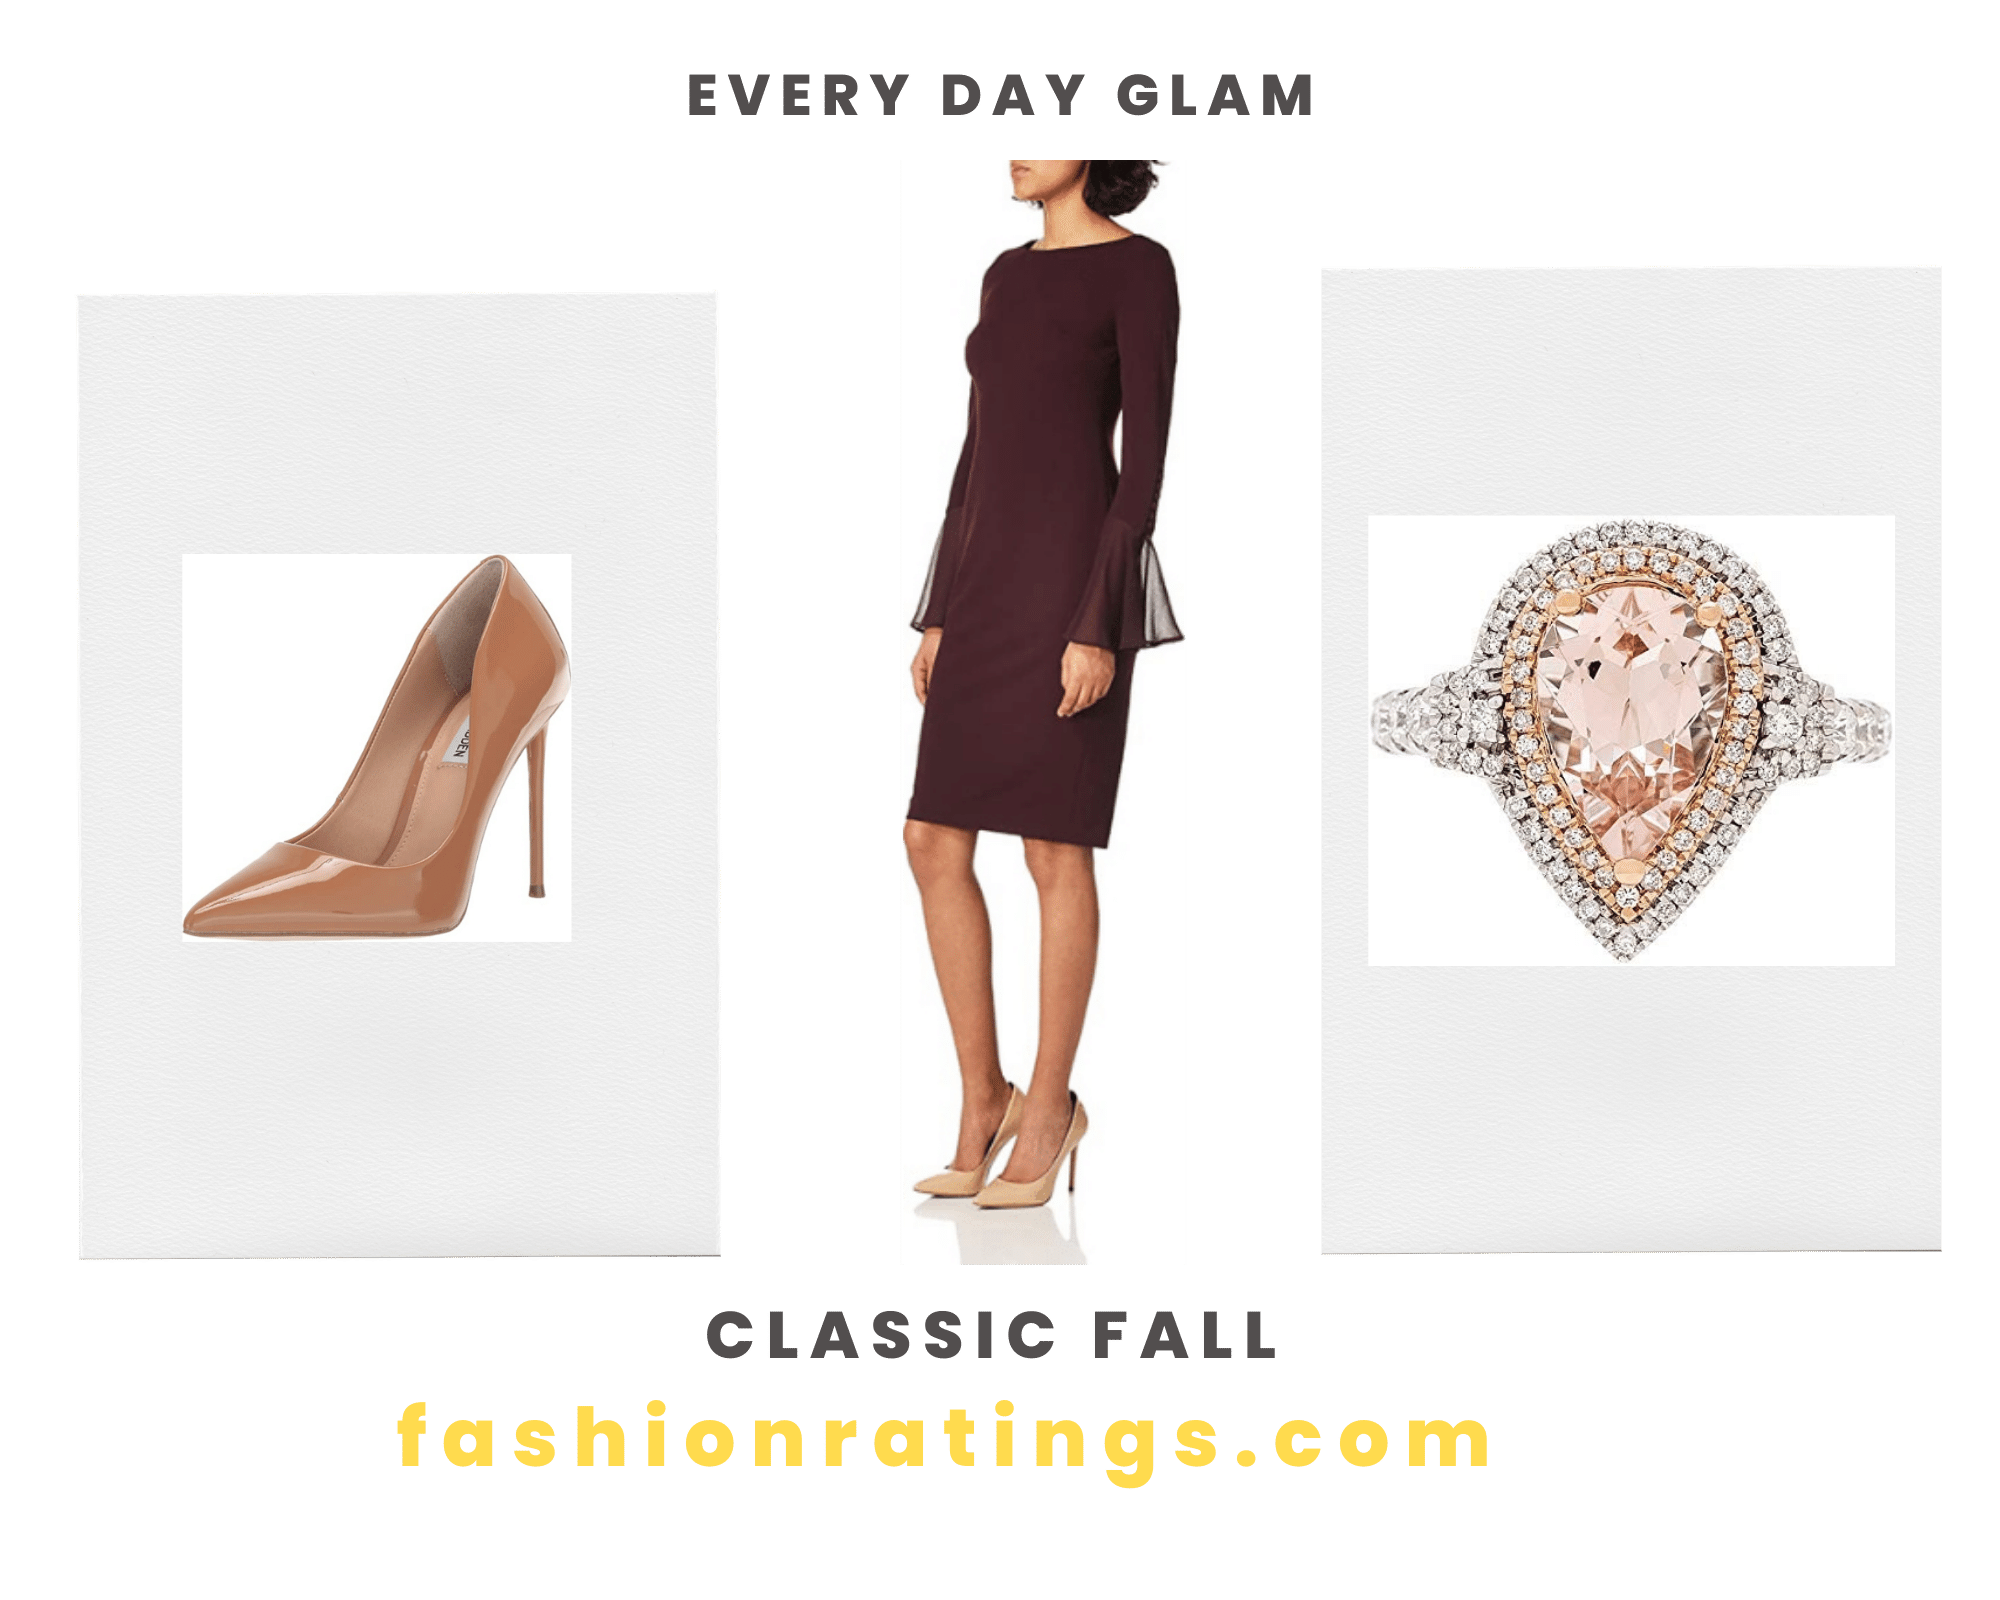 Nude Patent Pumps Cocktail Dress and Cocktail Ring